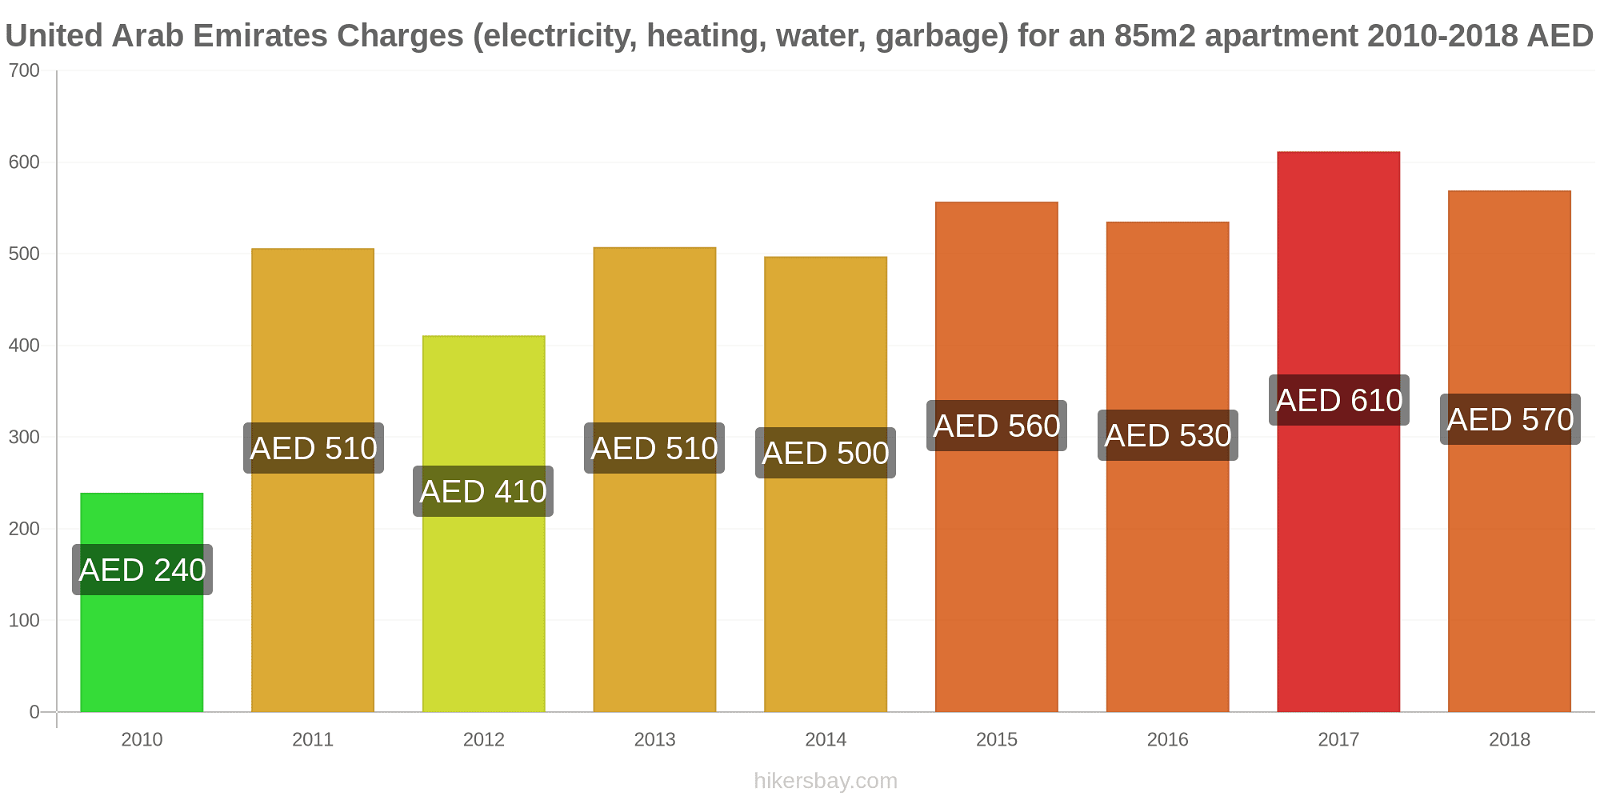 United Arab Emirates price changes Utilities (electricity, heating, water, garbage) for an 85m2 apartment hikersbay.com